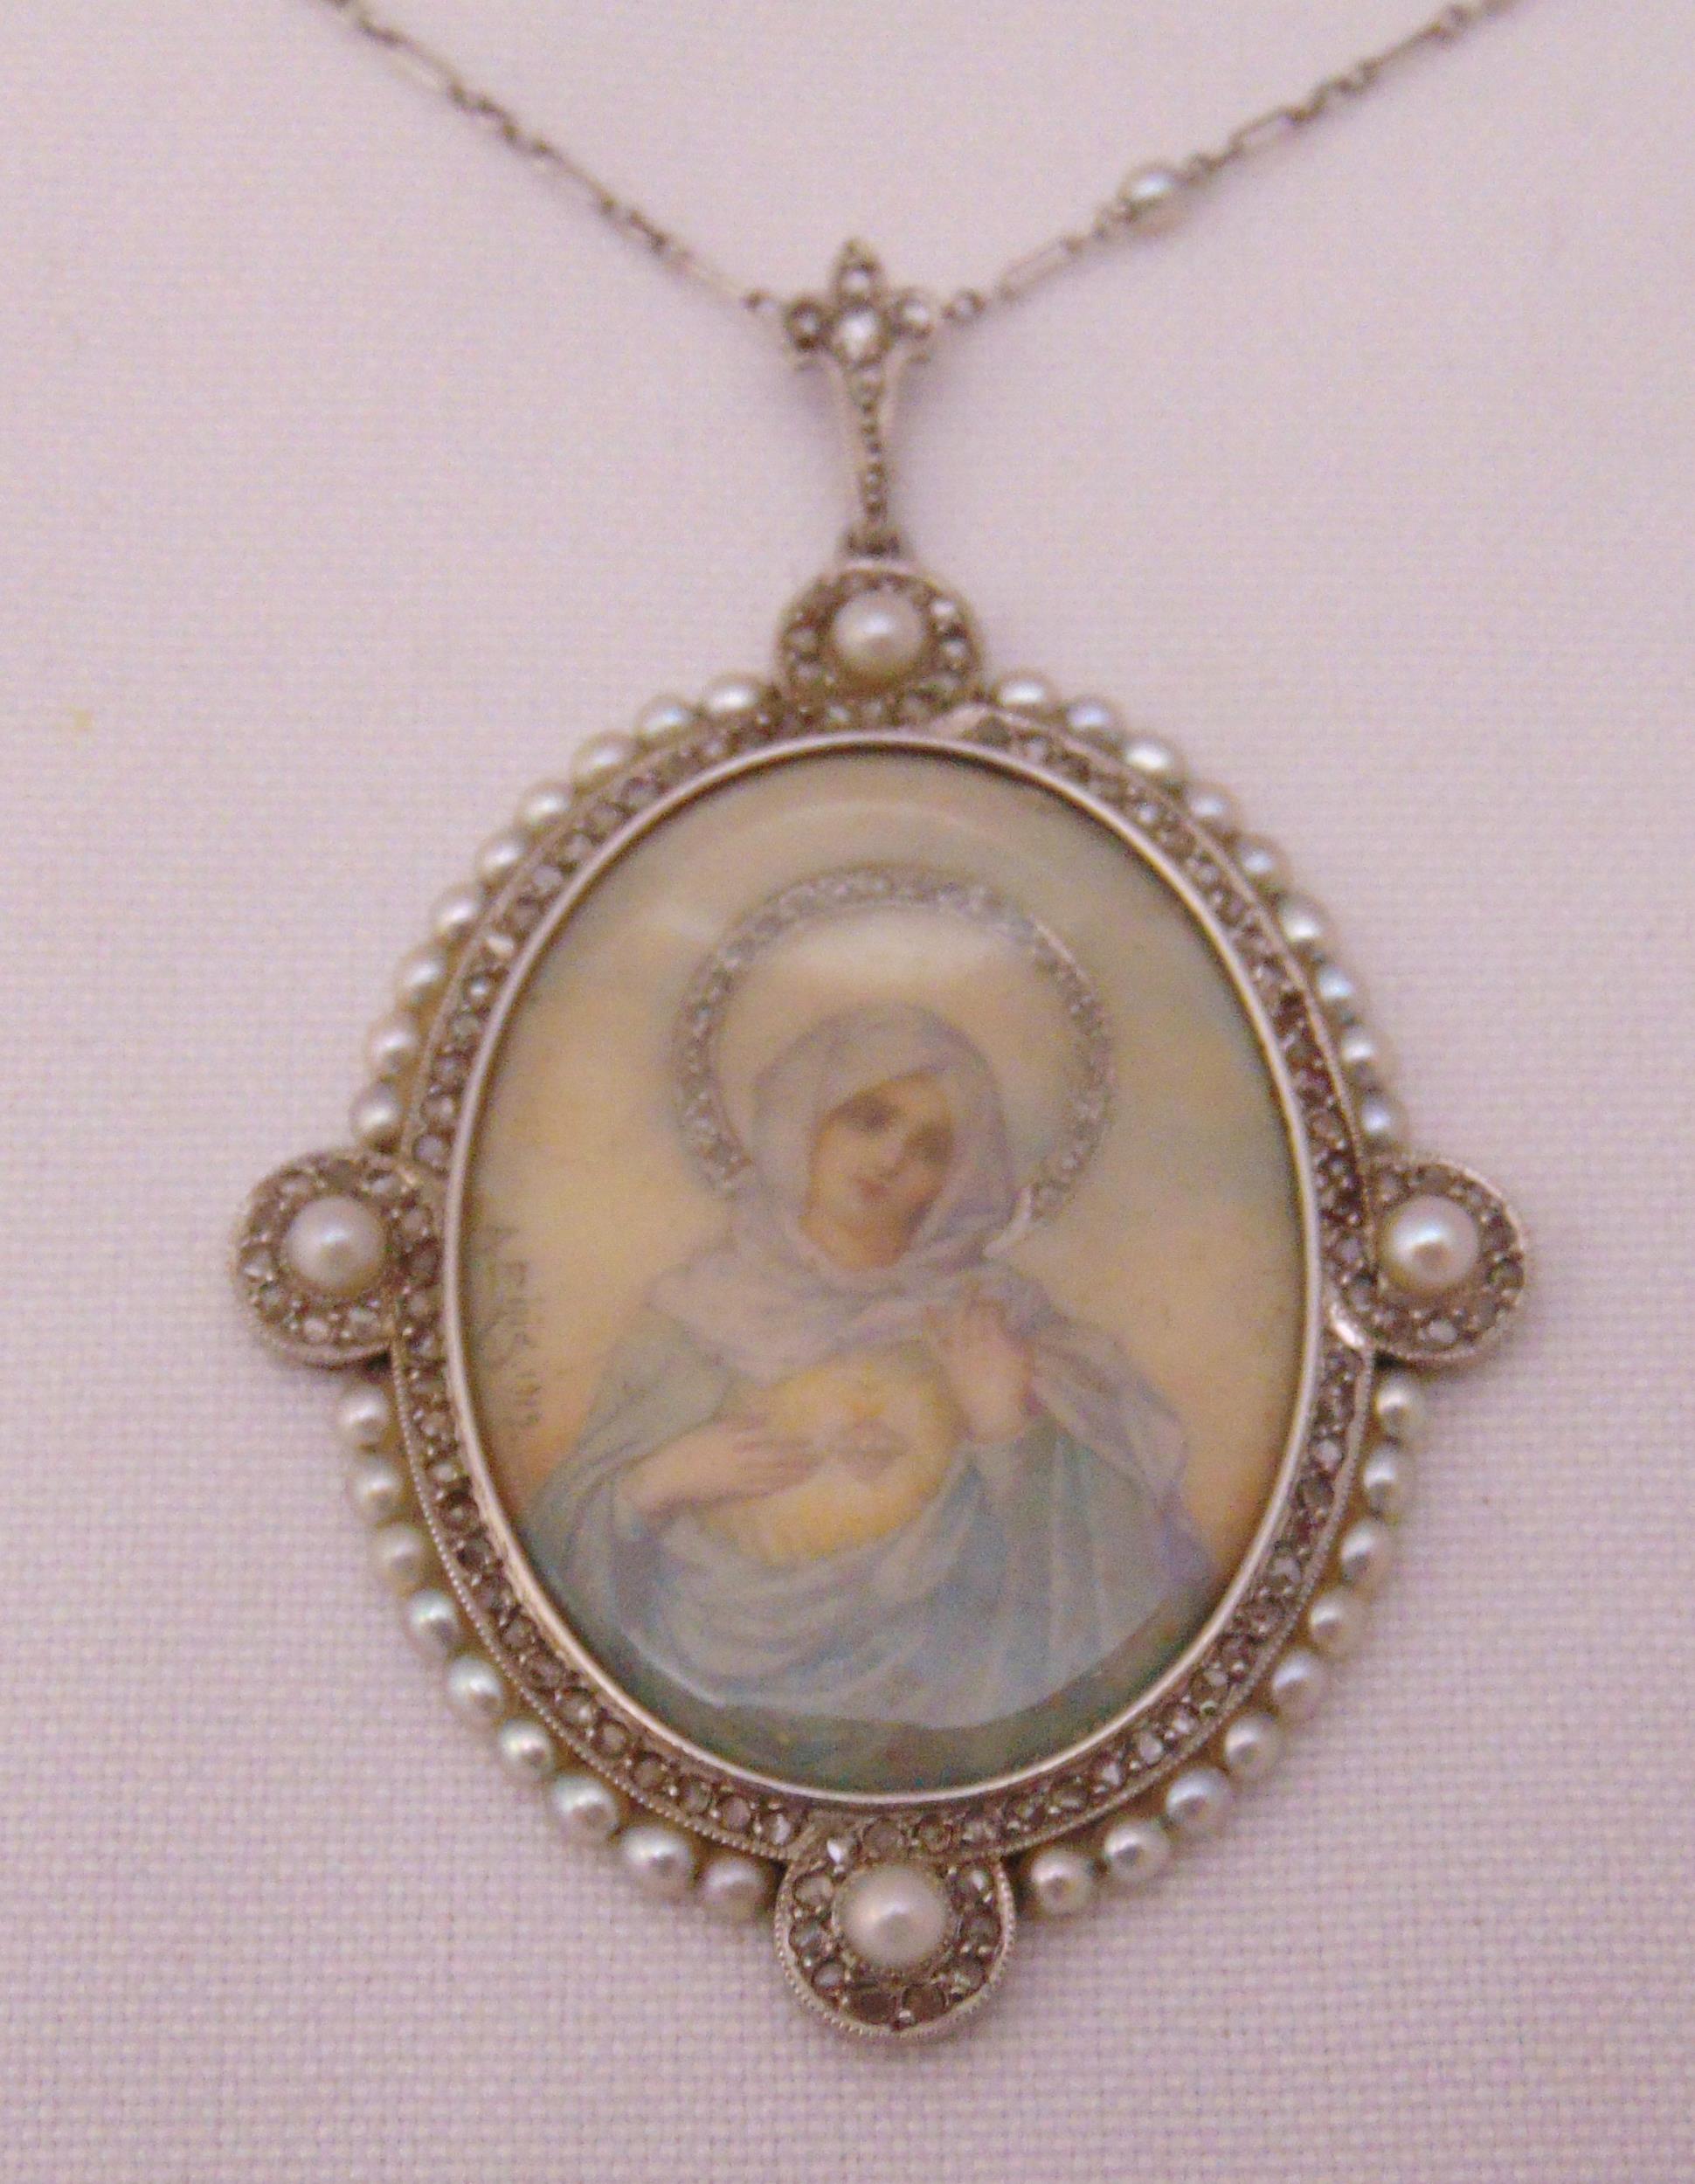 A Madonna pendant set with seed pearls on a platinum chain, signed A Rijis dated 1919 - Image 2 of 3